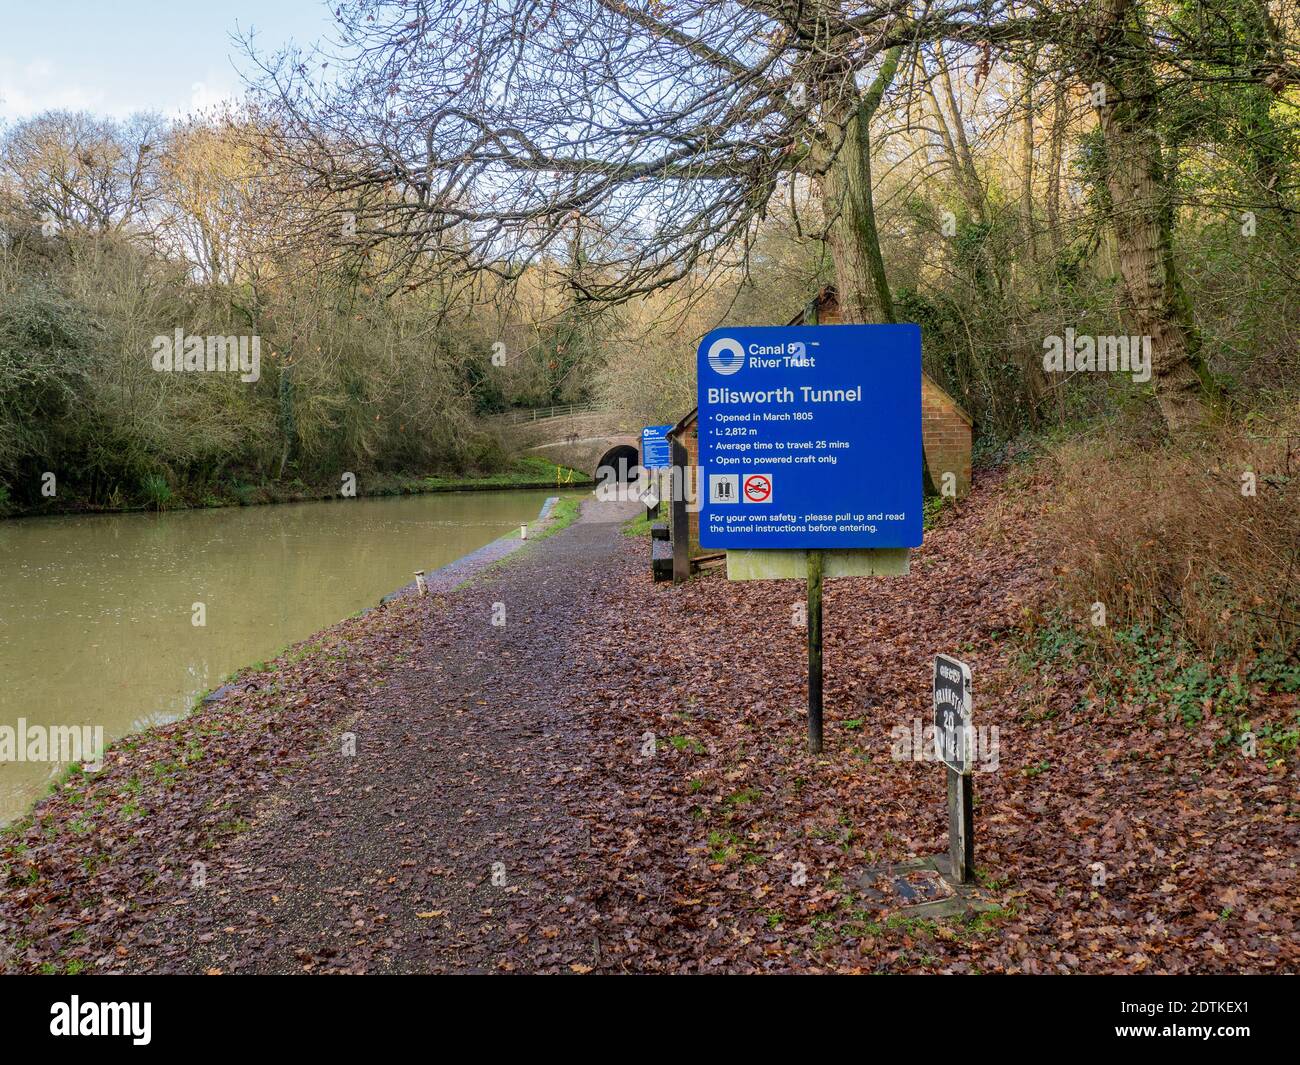 Canal & River Trust information board for Blisworth Tunnel on the canal towpath at Stoke Bruerne, Northamptonshire, UK Stock Photo